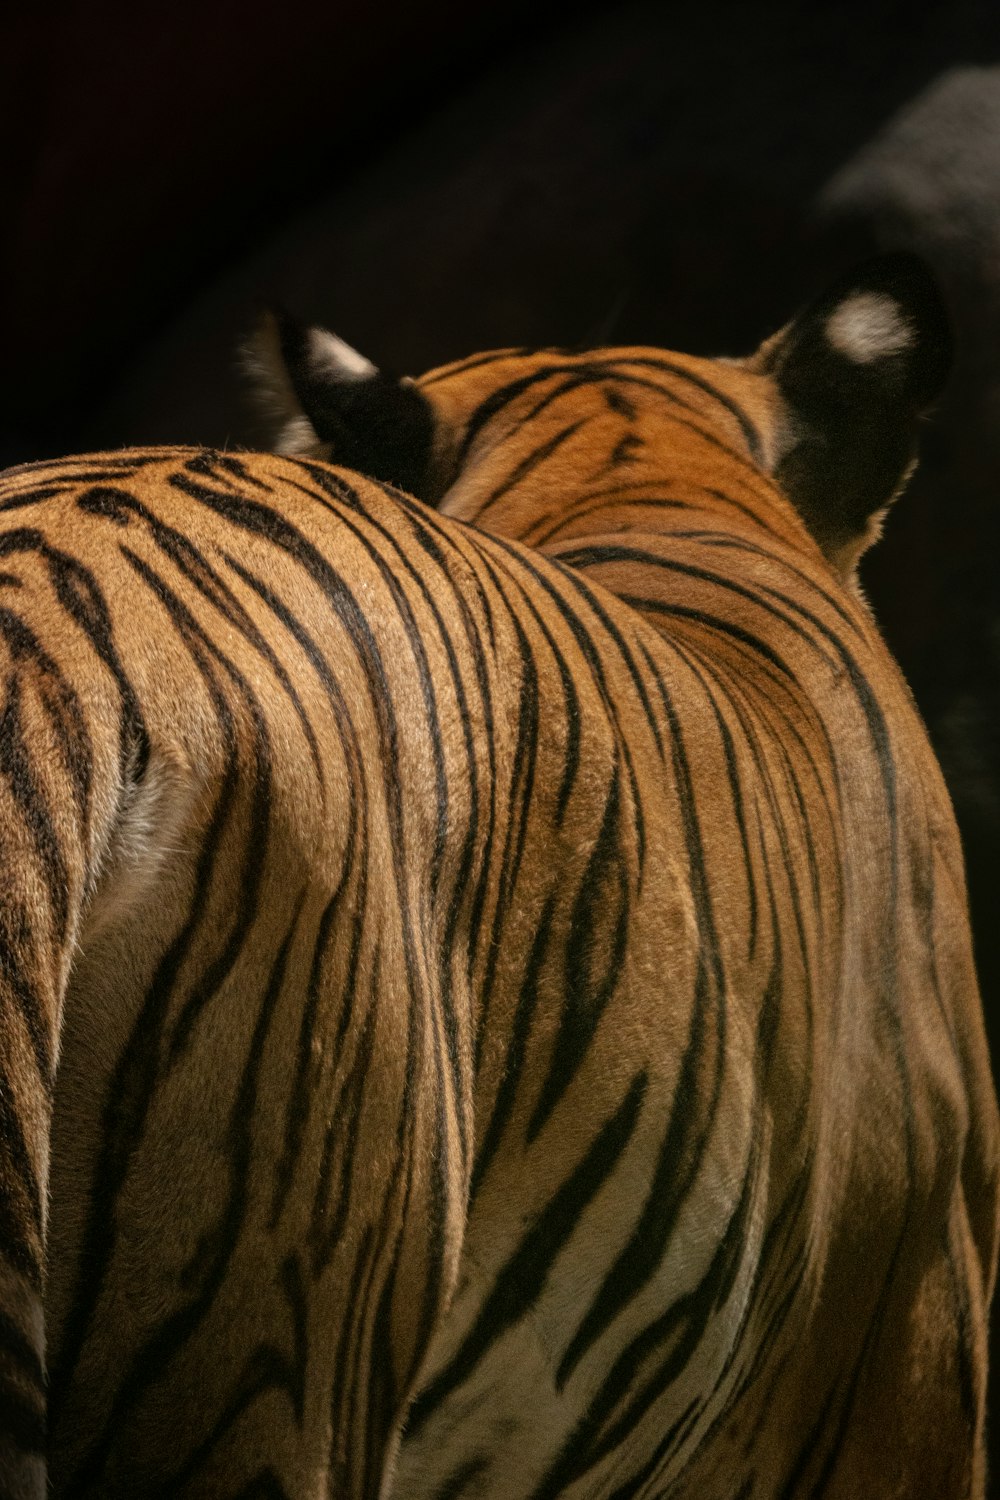 a close up of a tiger's face and tail